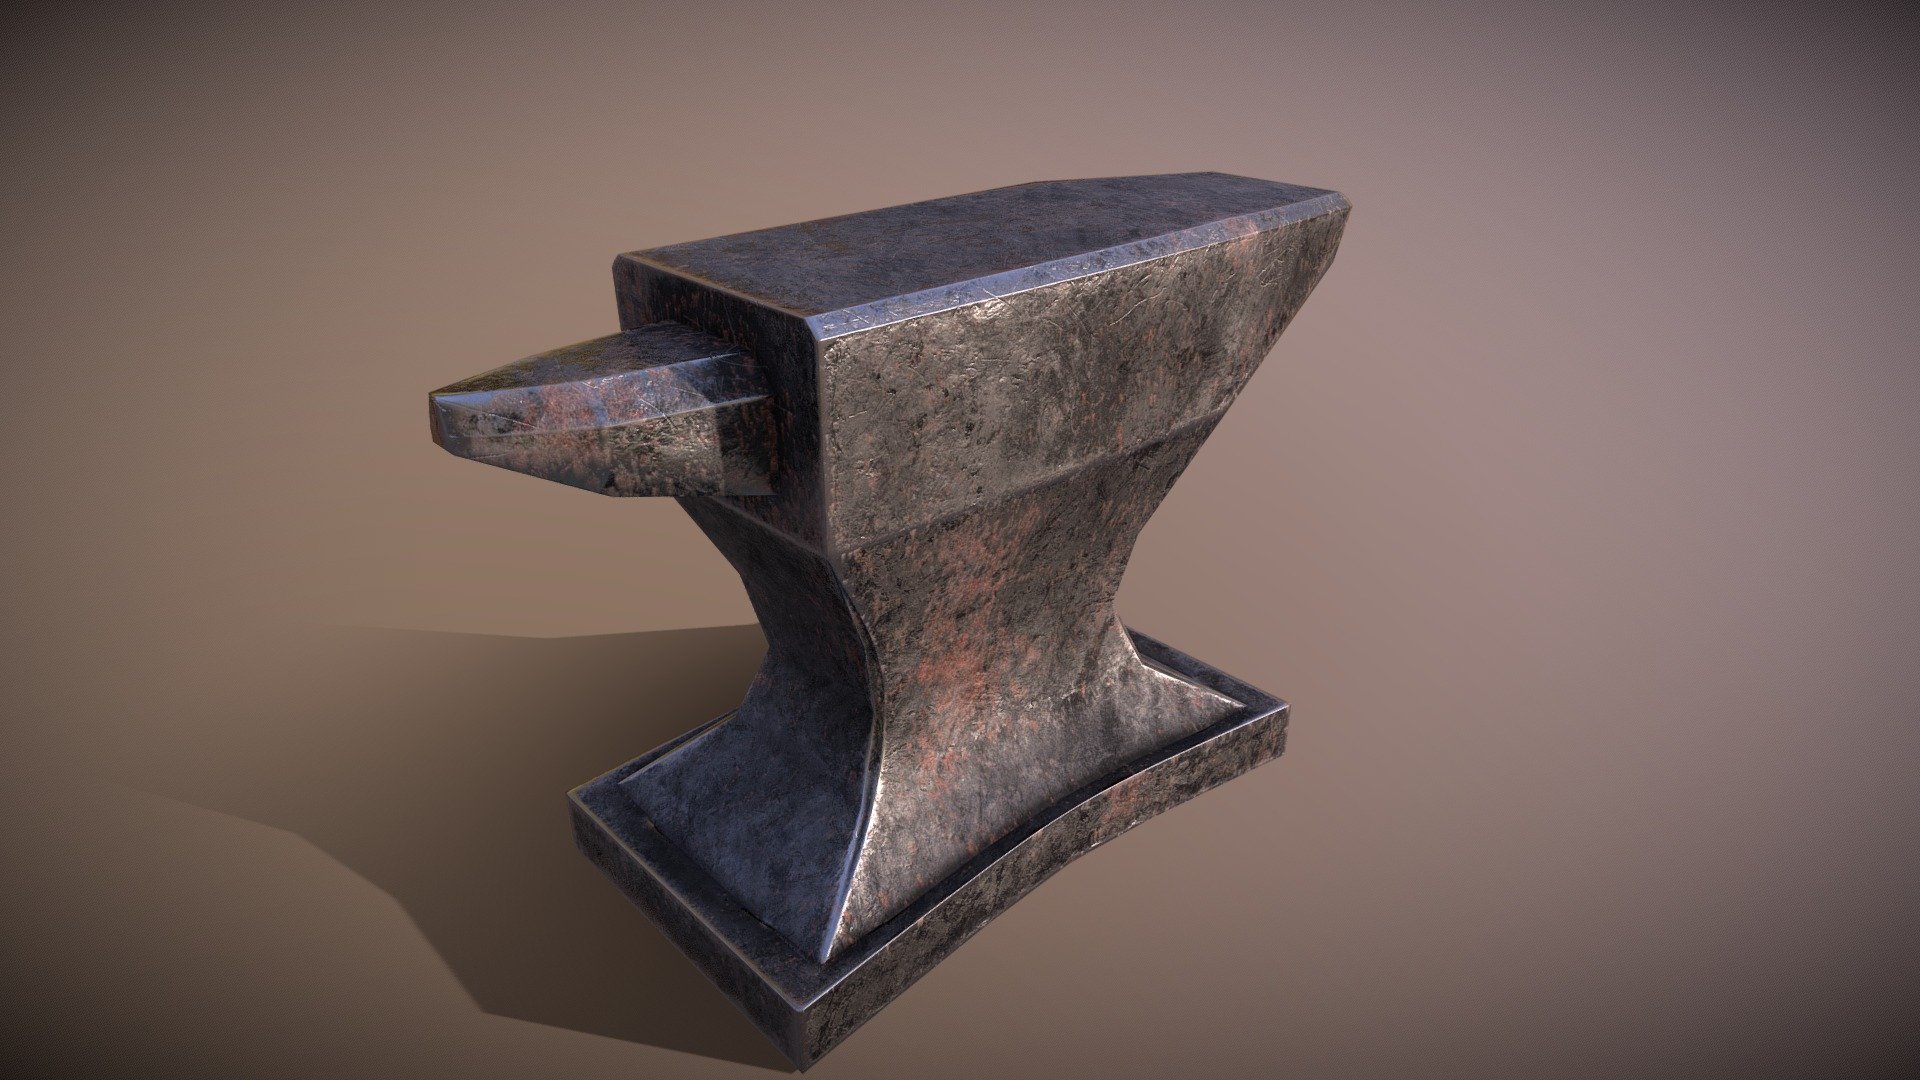 ANVIL download the new for windows